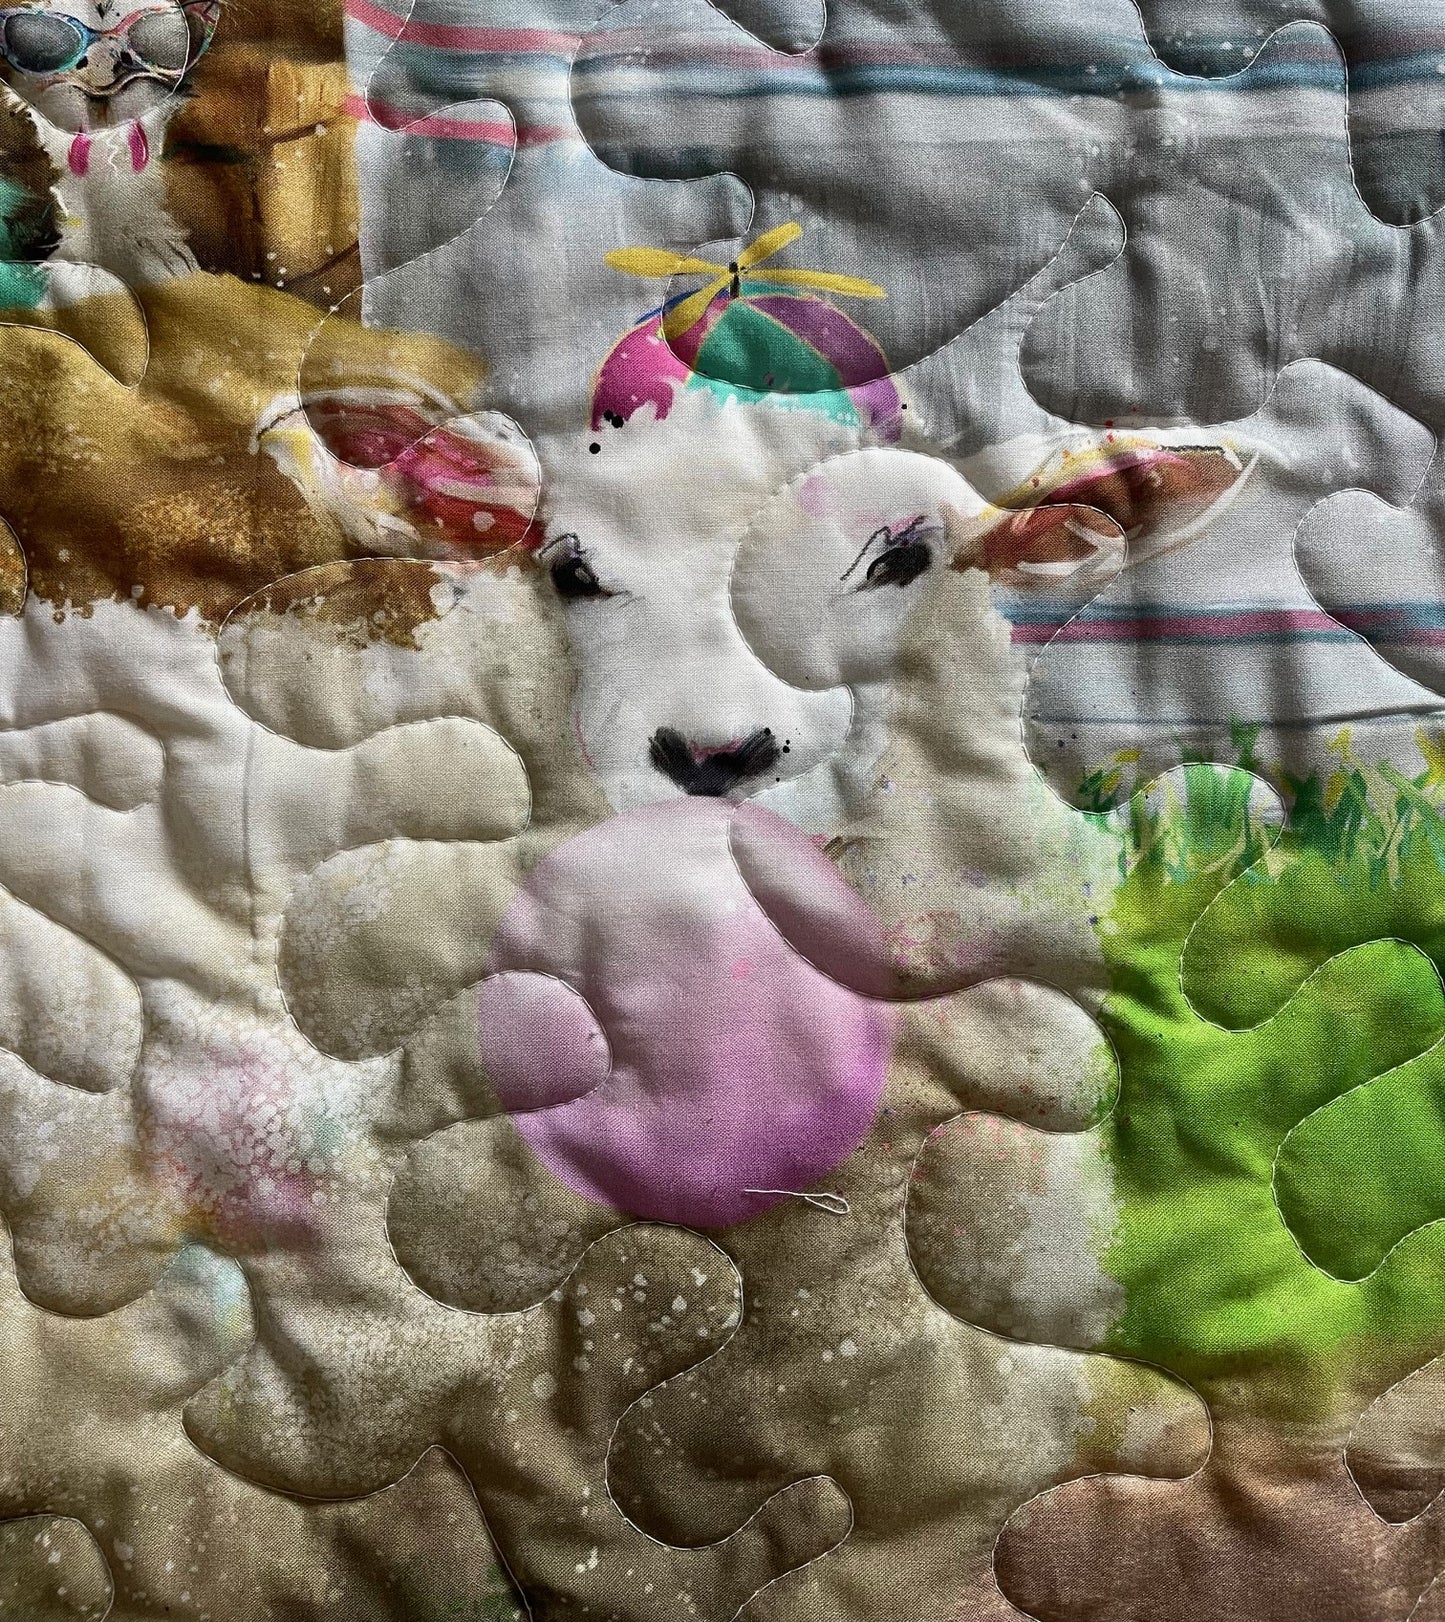 FARM ANIMALS *WELCOME TO THE FUNNY FARM* Handmade Quilted Blanket